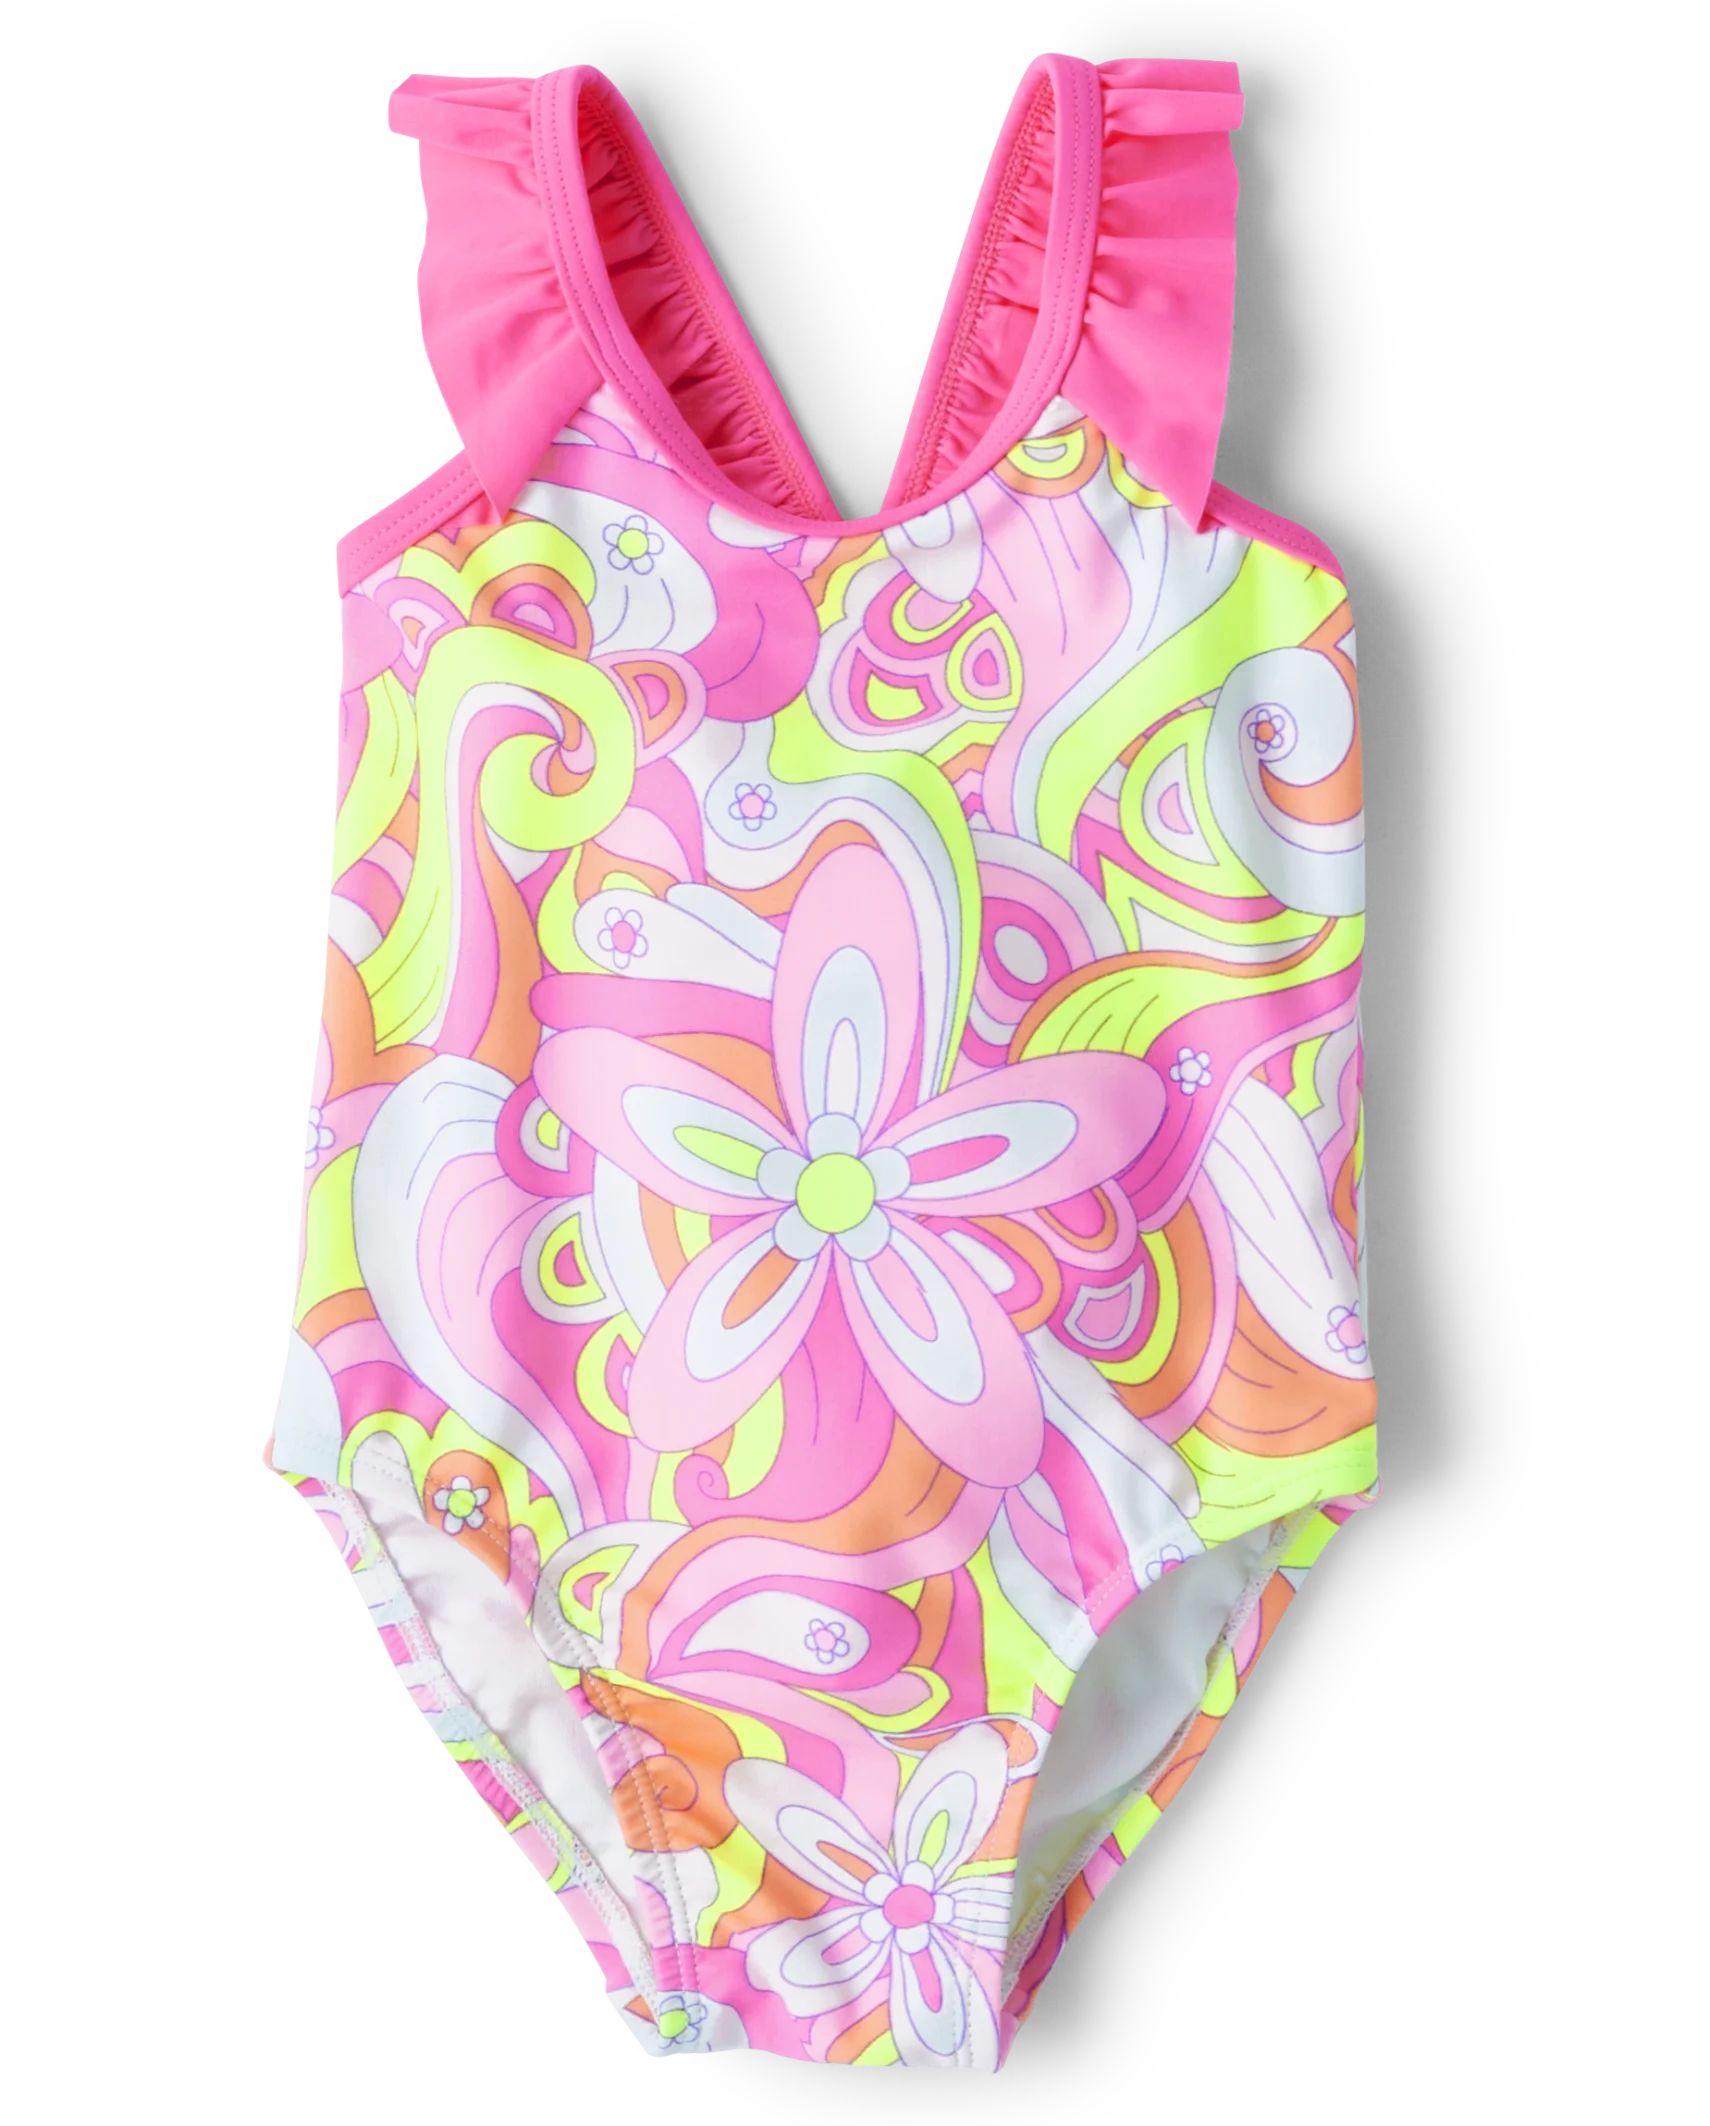 Baby And Toddler Girls Print One Piece Swimsuit - scooter pink neon | The Children's Place